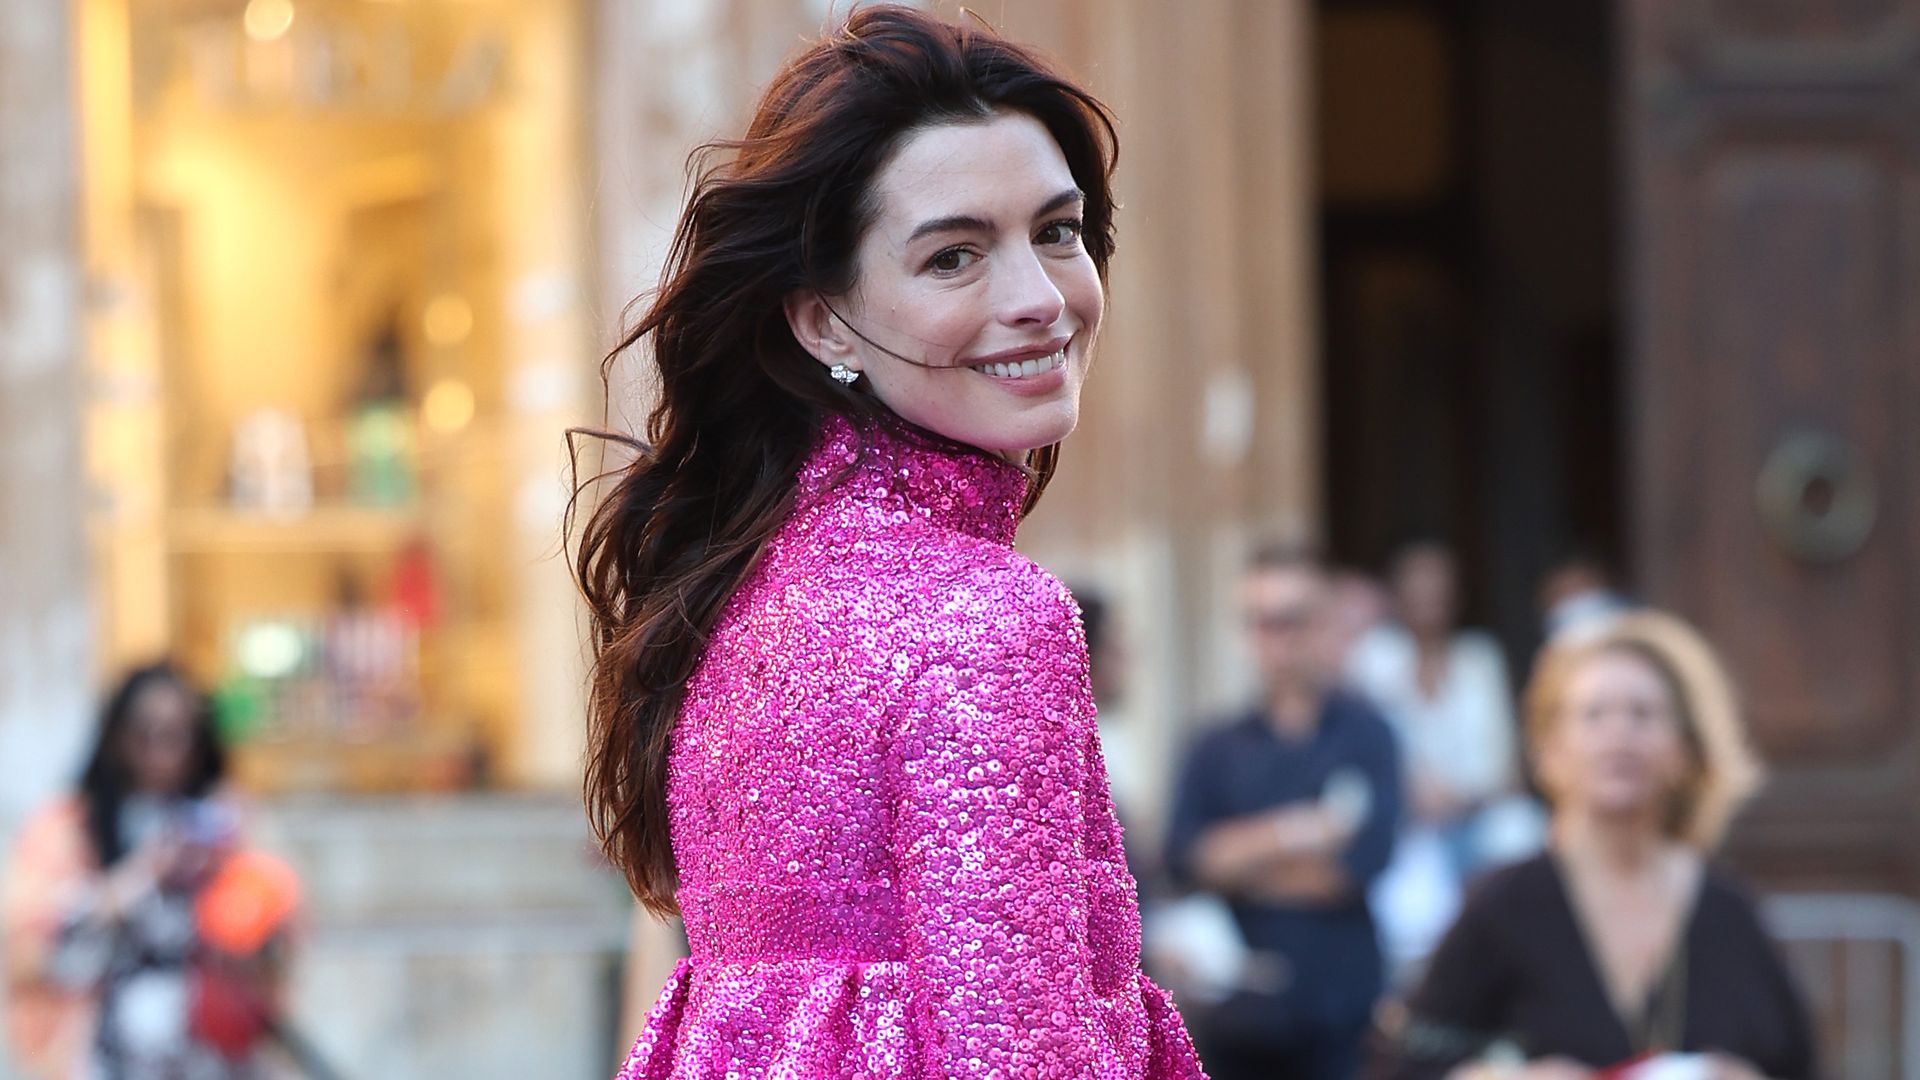 ROME, ITALY - JULY 08: Anne Hathaway is seen arriving at the Valentino Haute Couture Fall/Winter 22/23 fashion show on July 08, 2022 in Rome, Italy. (Photo by Jacopo Raule/Getty Images)